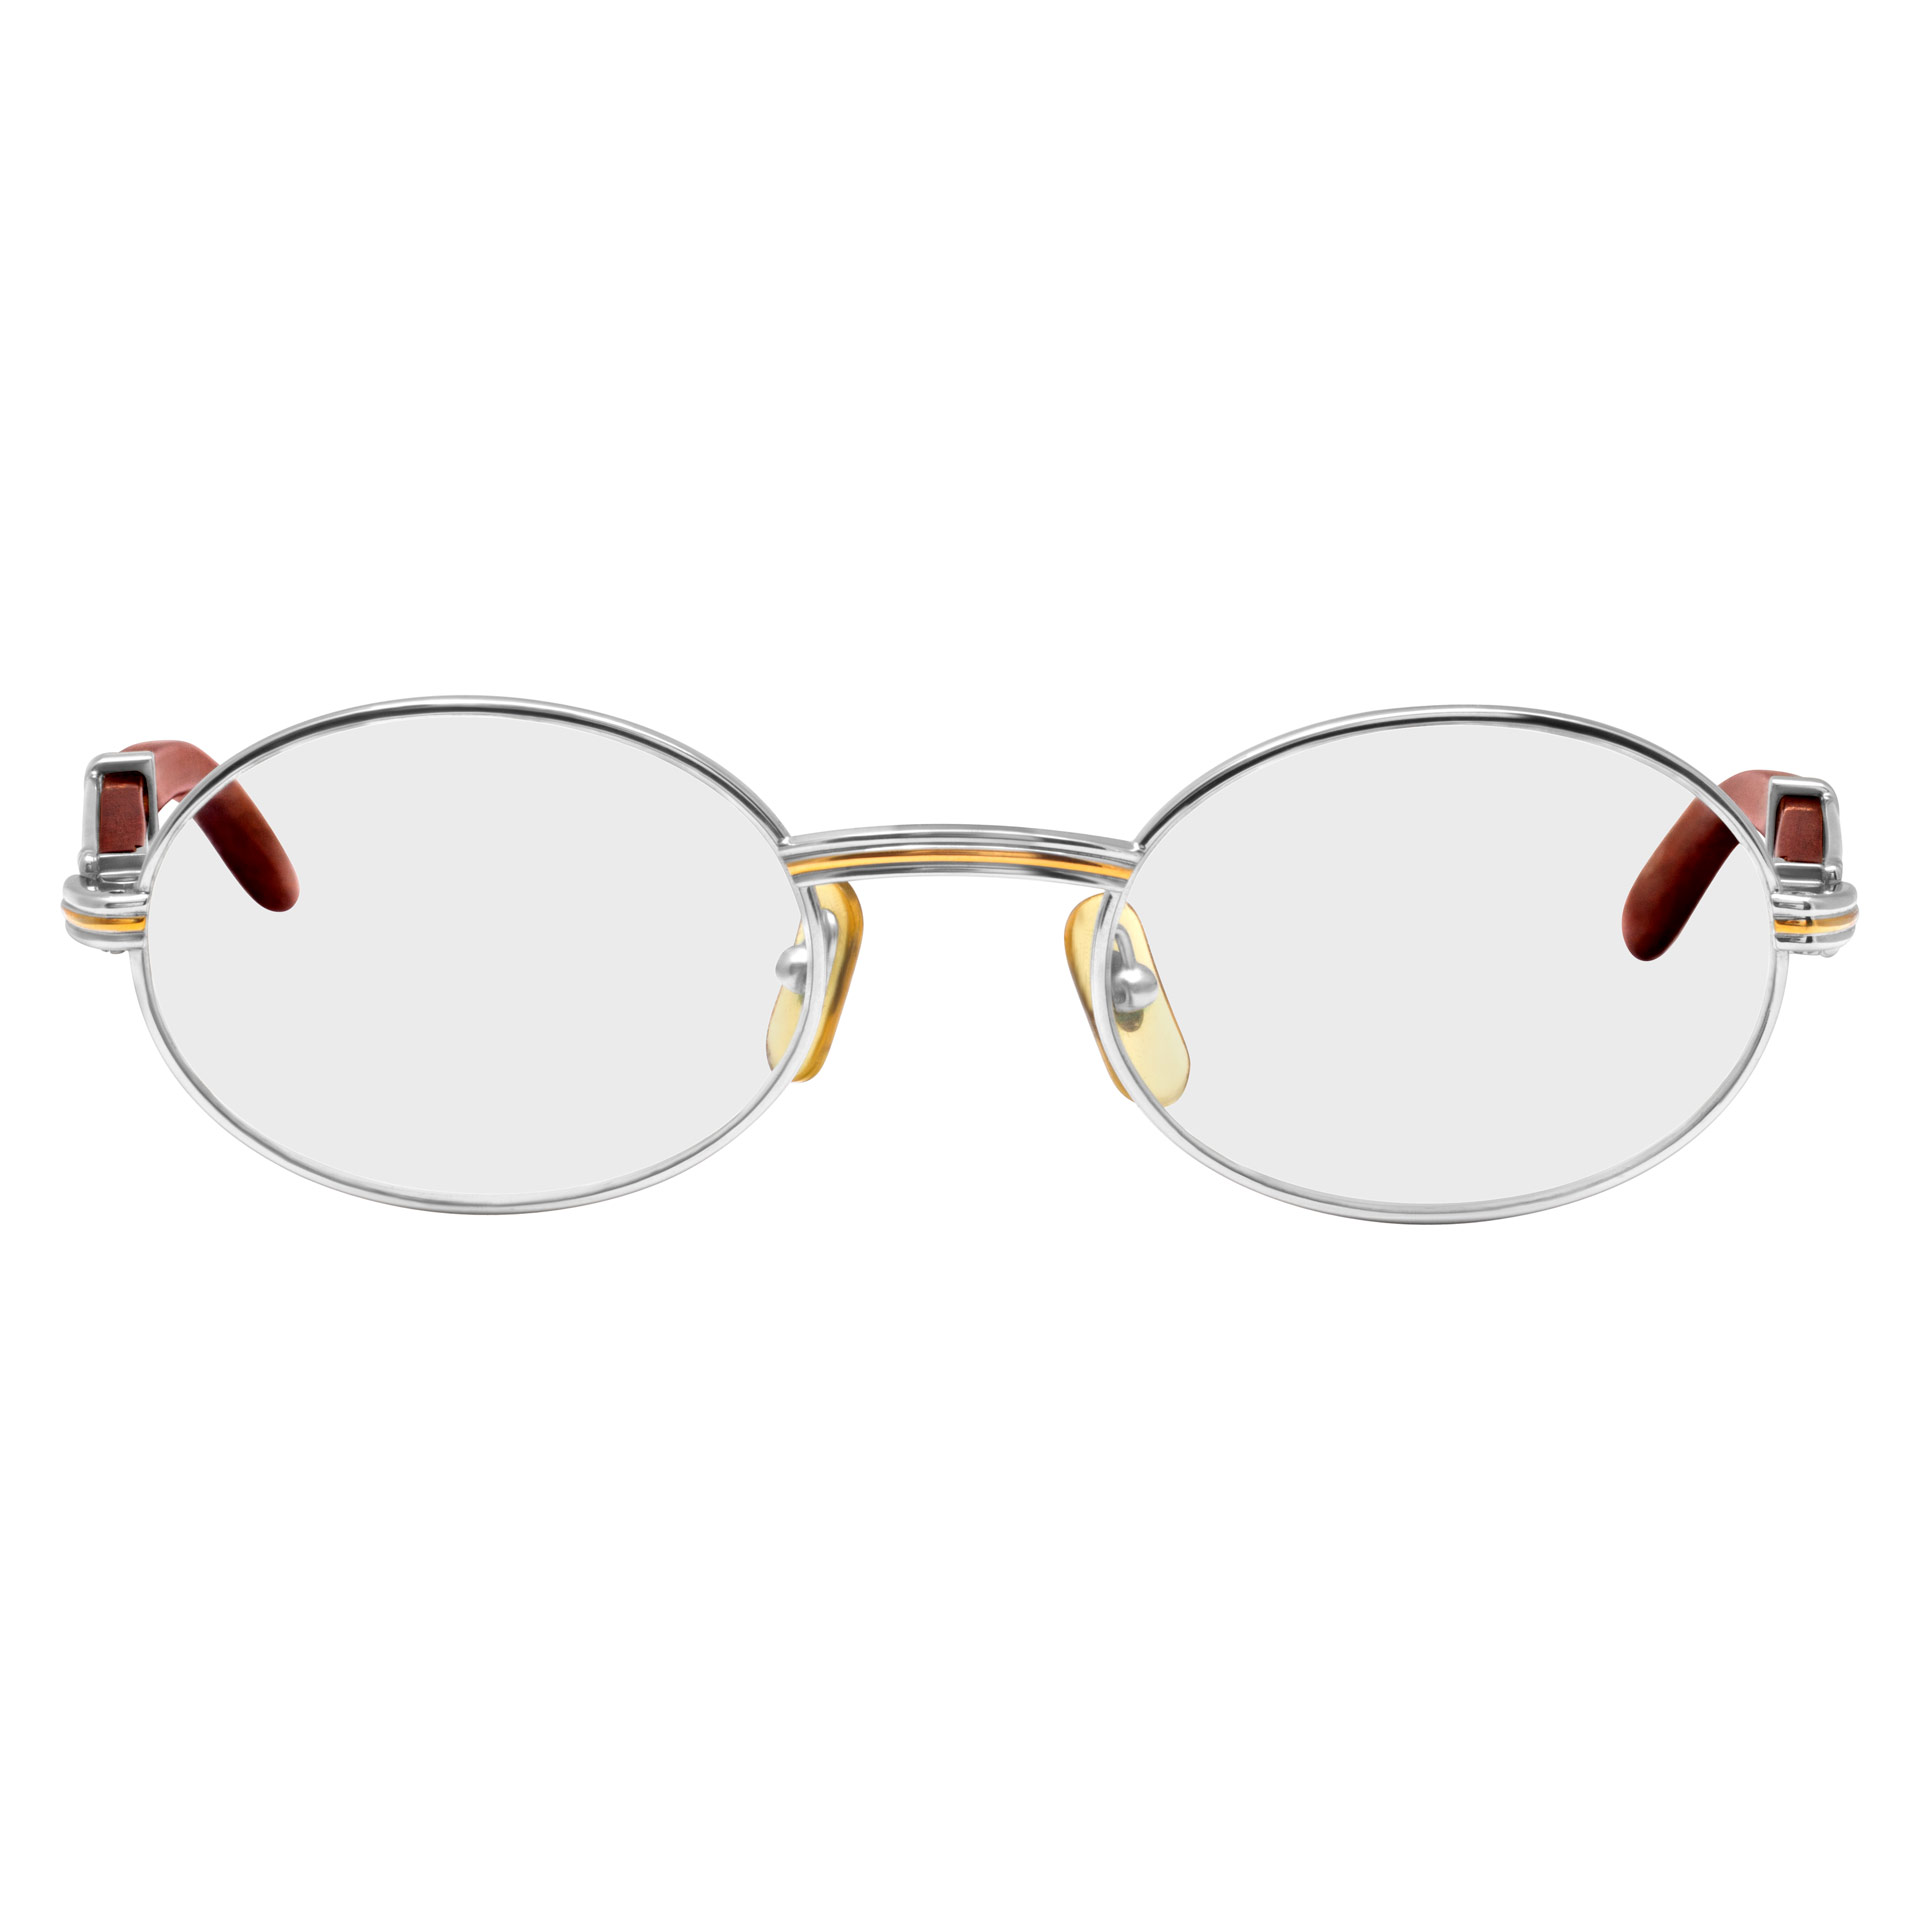 Cartier Trinity glasses with wood stems image 1